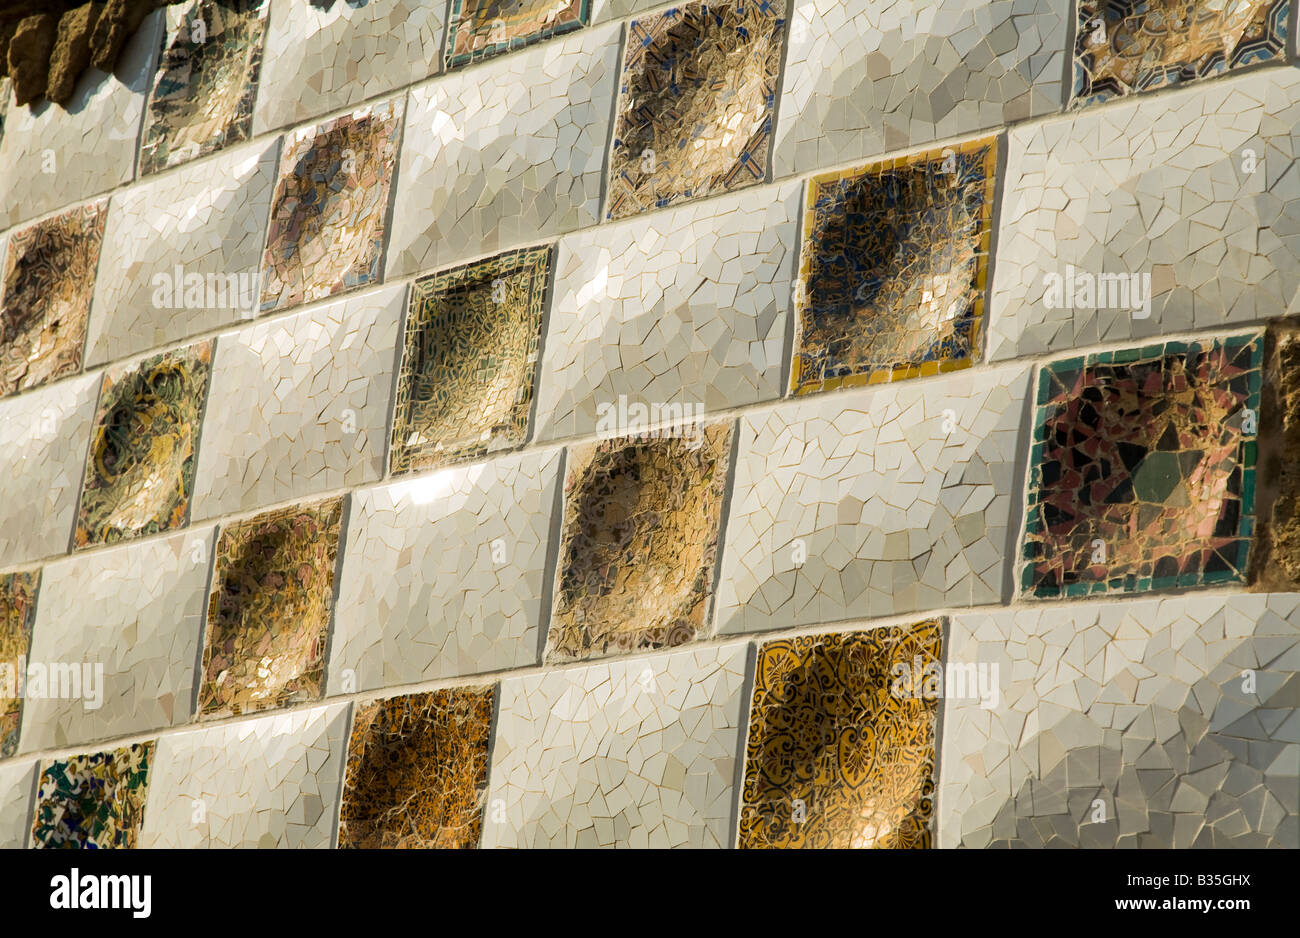 SPAIN Barcelona Detail of mosaic tiles in Parc Guell designed Antoni Gaudi architect Modernisme architecture Stock Photo